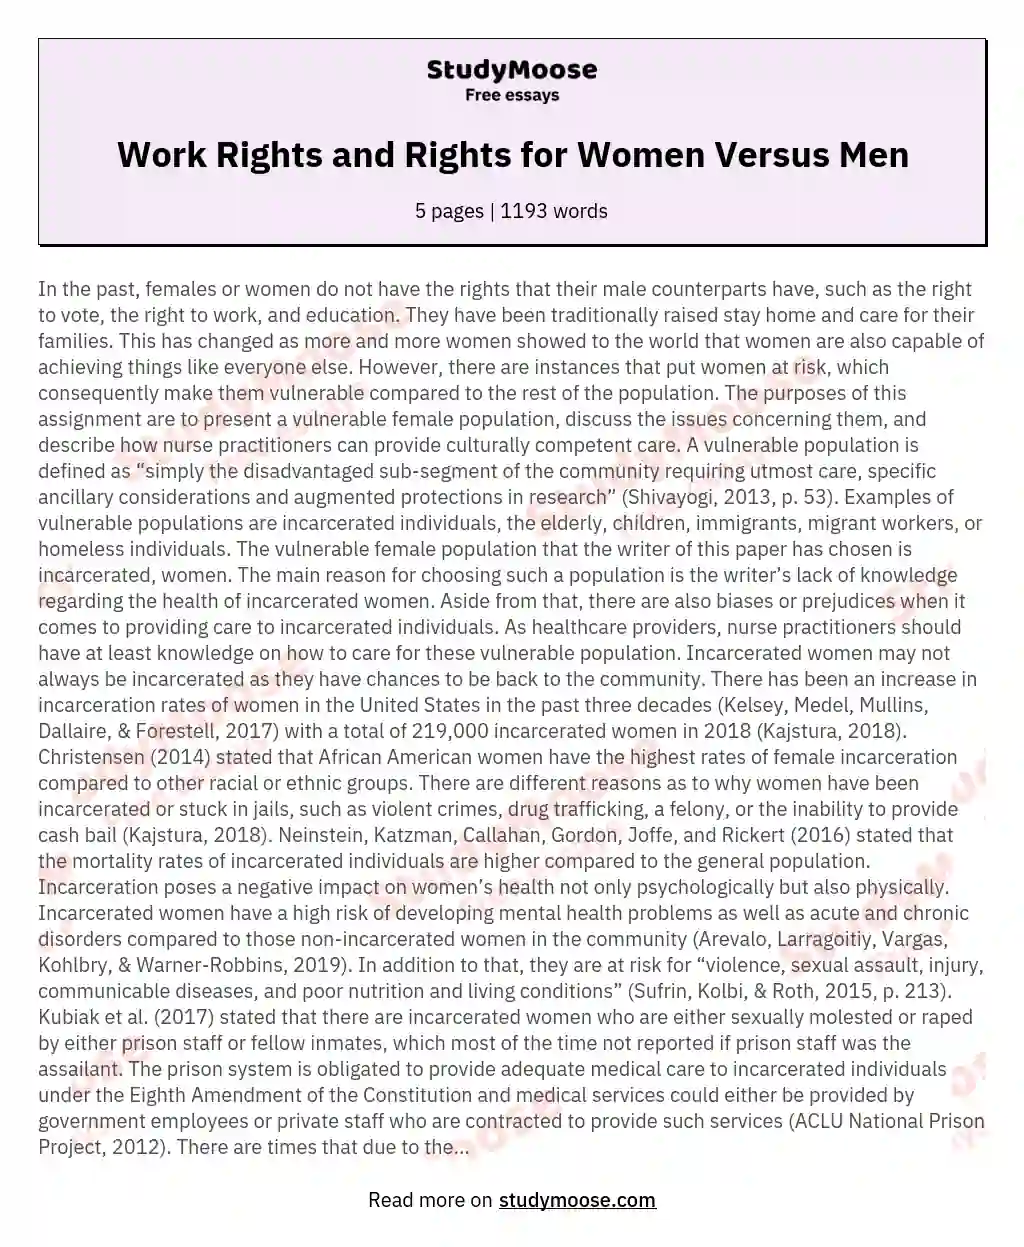 Work Rights and Rights for Women Versus Men